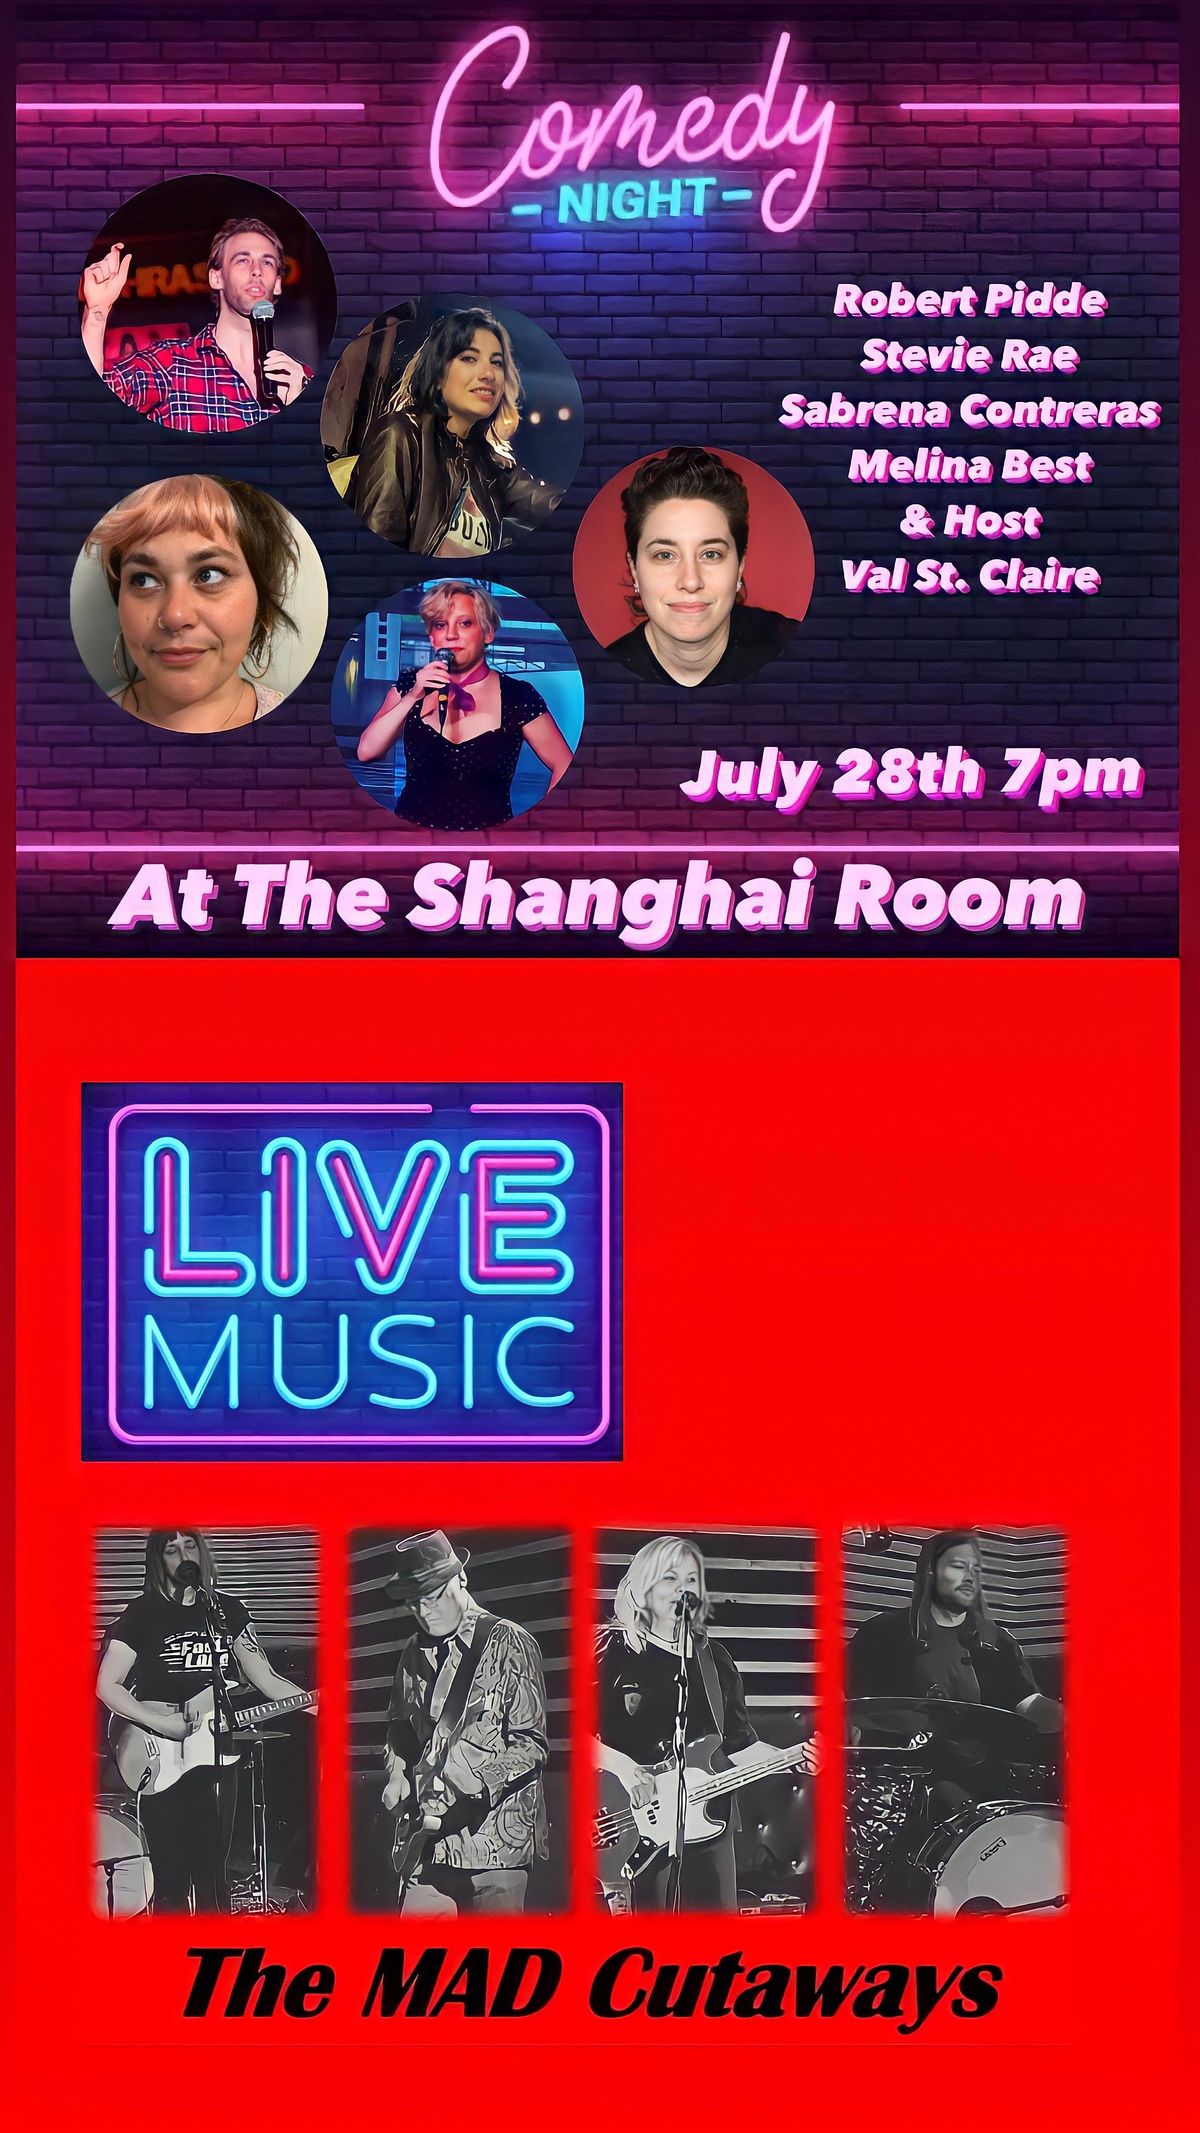 An Evening of Live Music and Comedy at The Shanghai Room